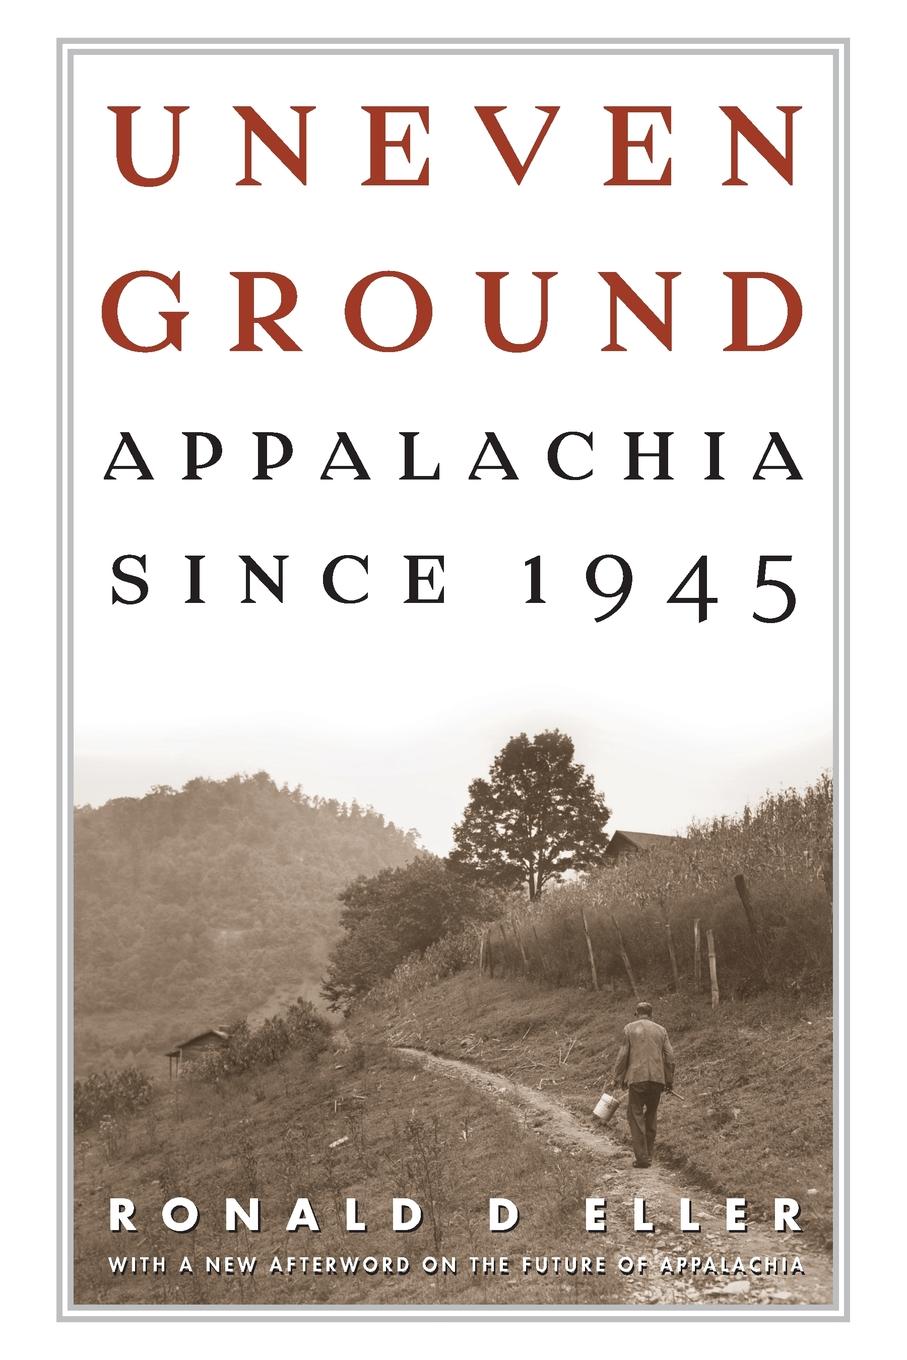 Uneven Ground. Appalachia since 1945